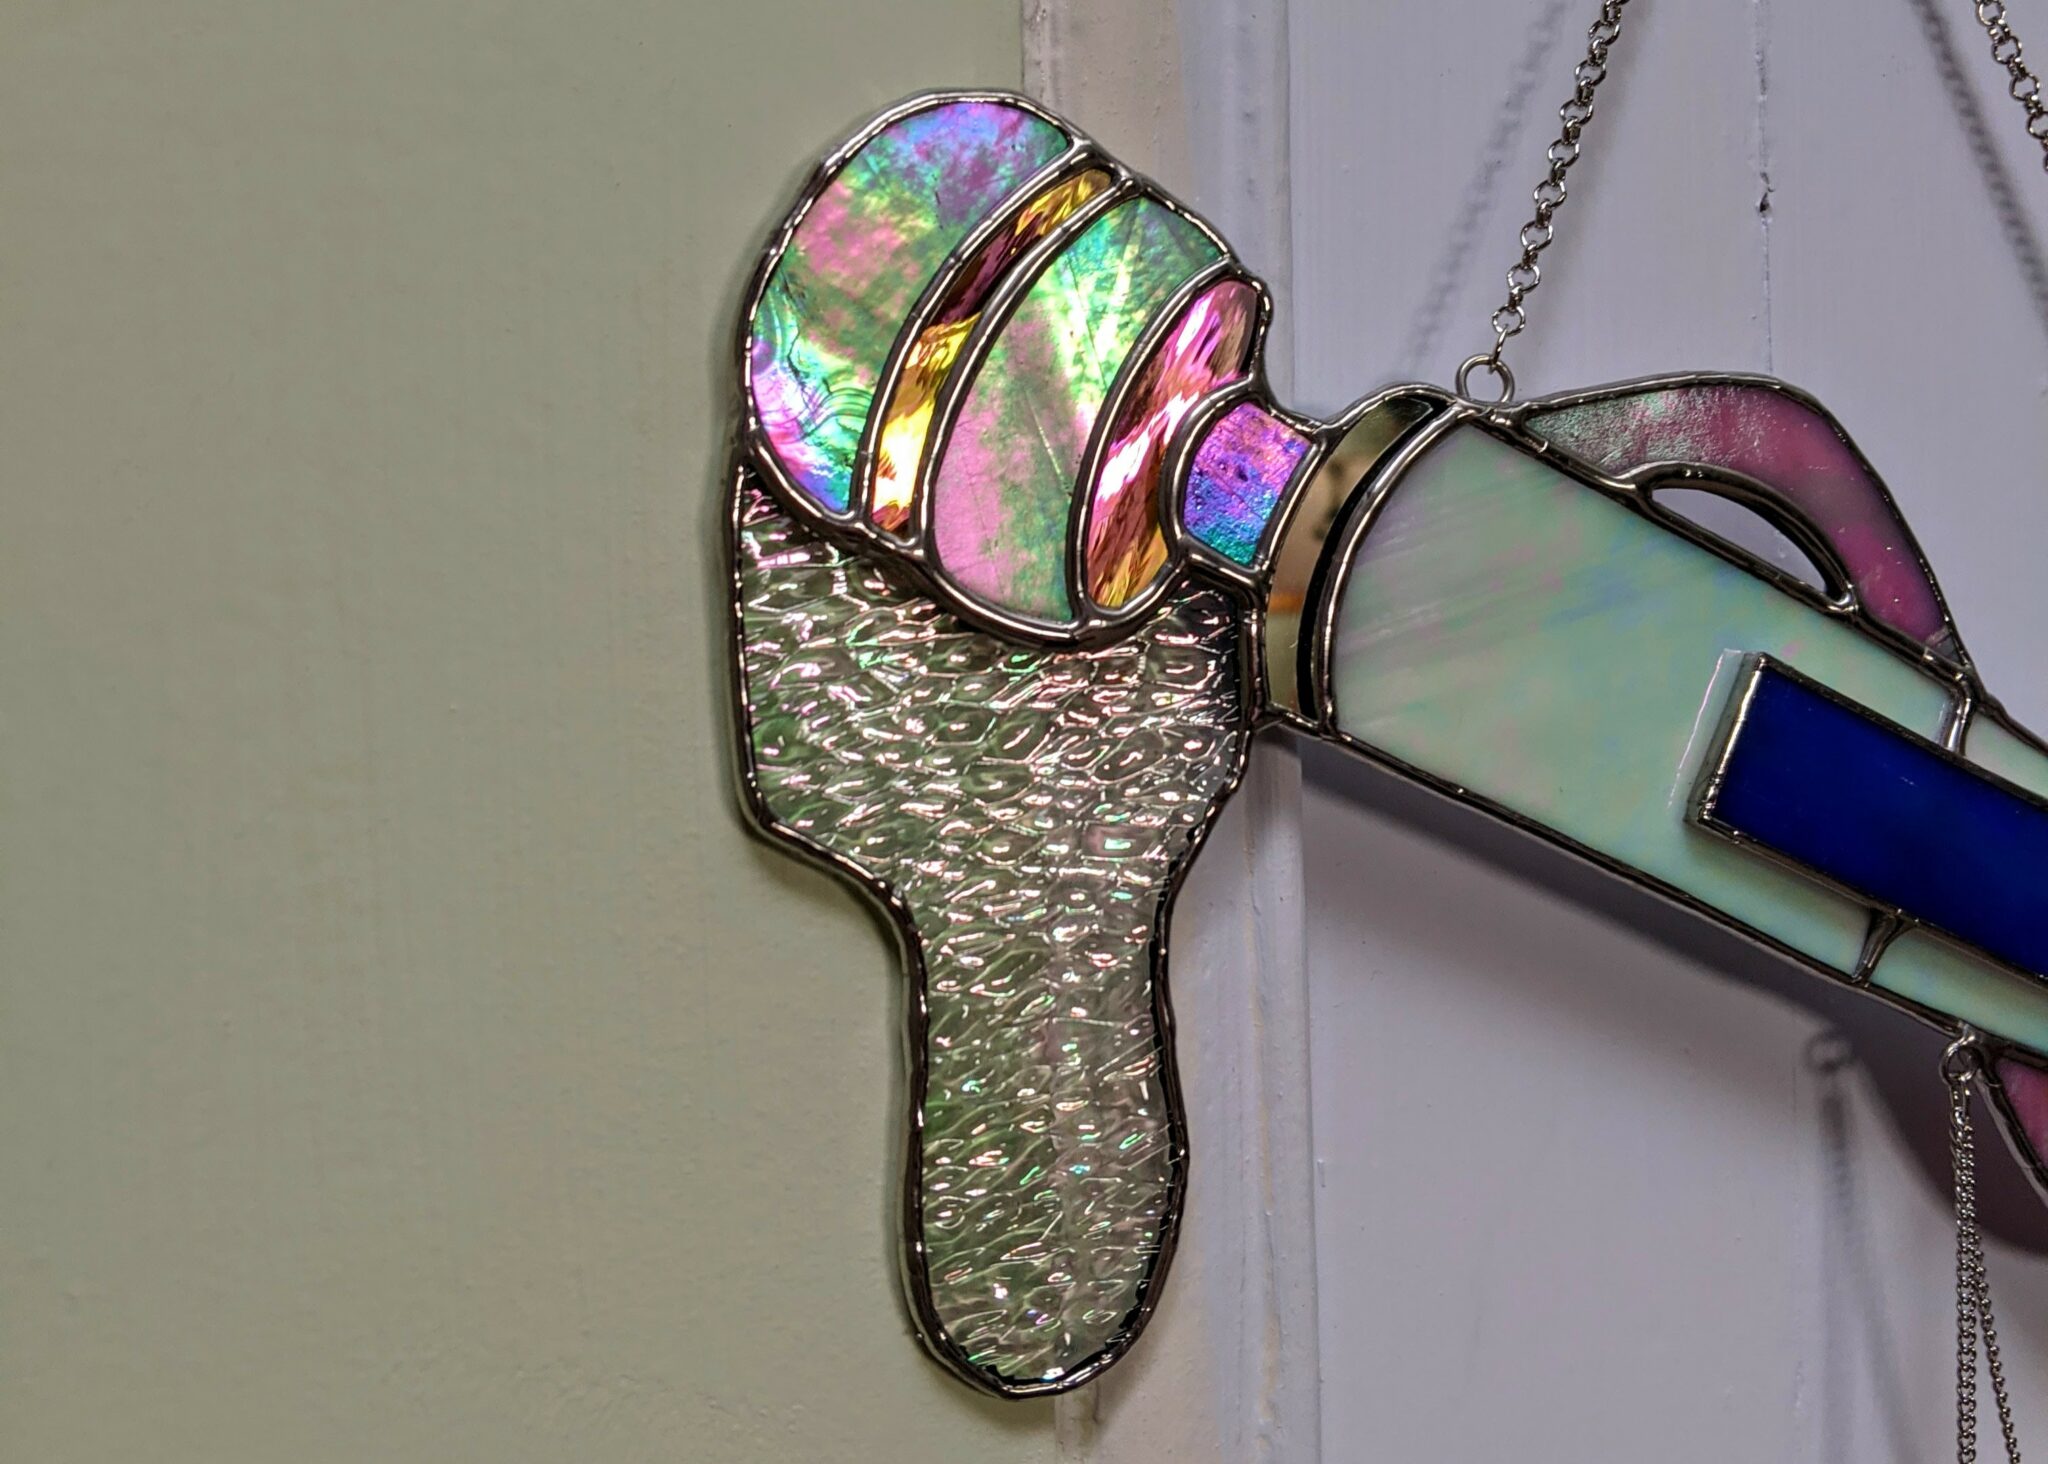 The head of the stained glass Magic Wand vibrator features a white glitter that appears to be dripping from the vibe.